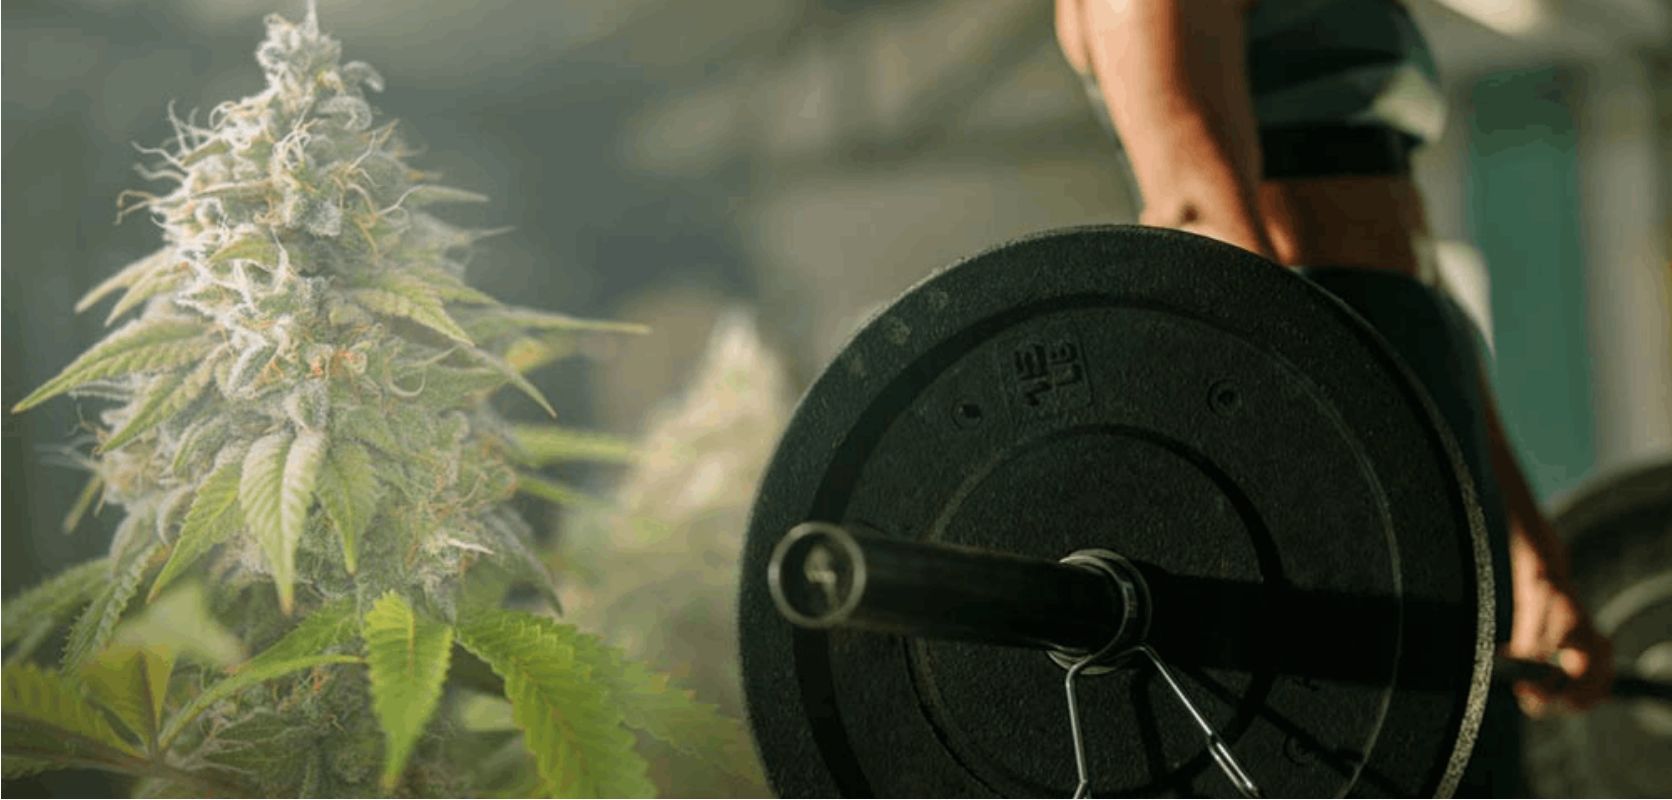 Cannabis is more than just a gym buddy! In fact, it's got a whole range of impressive perks for both recreational and medical purposes. Check out these benefits of weed: